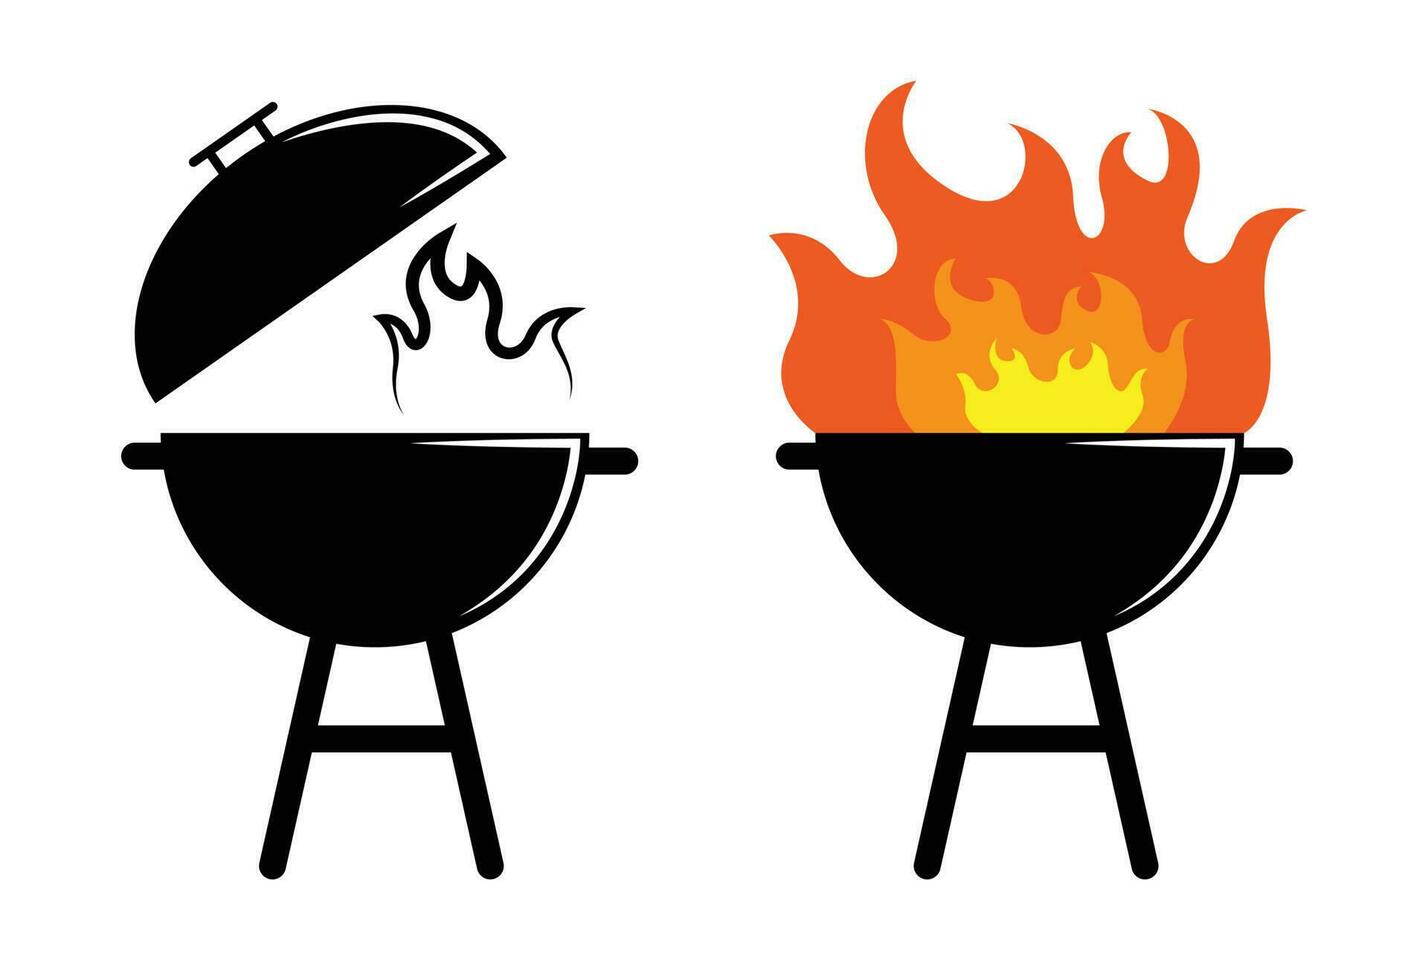 barbeque stove logo with fire vector